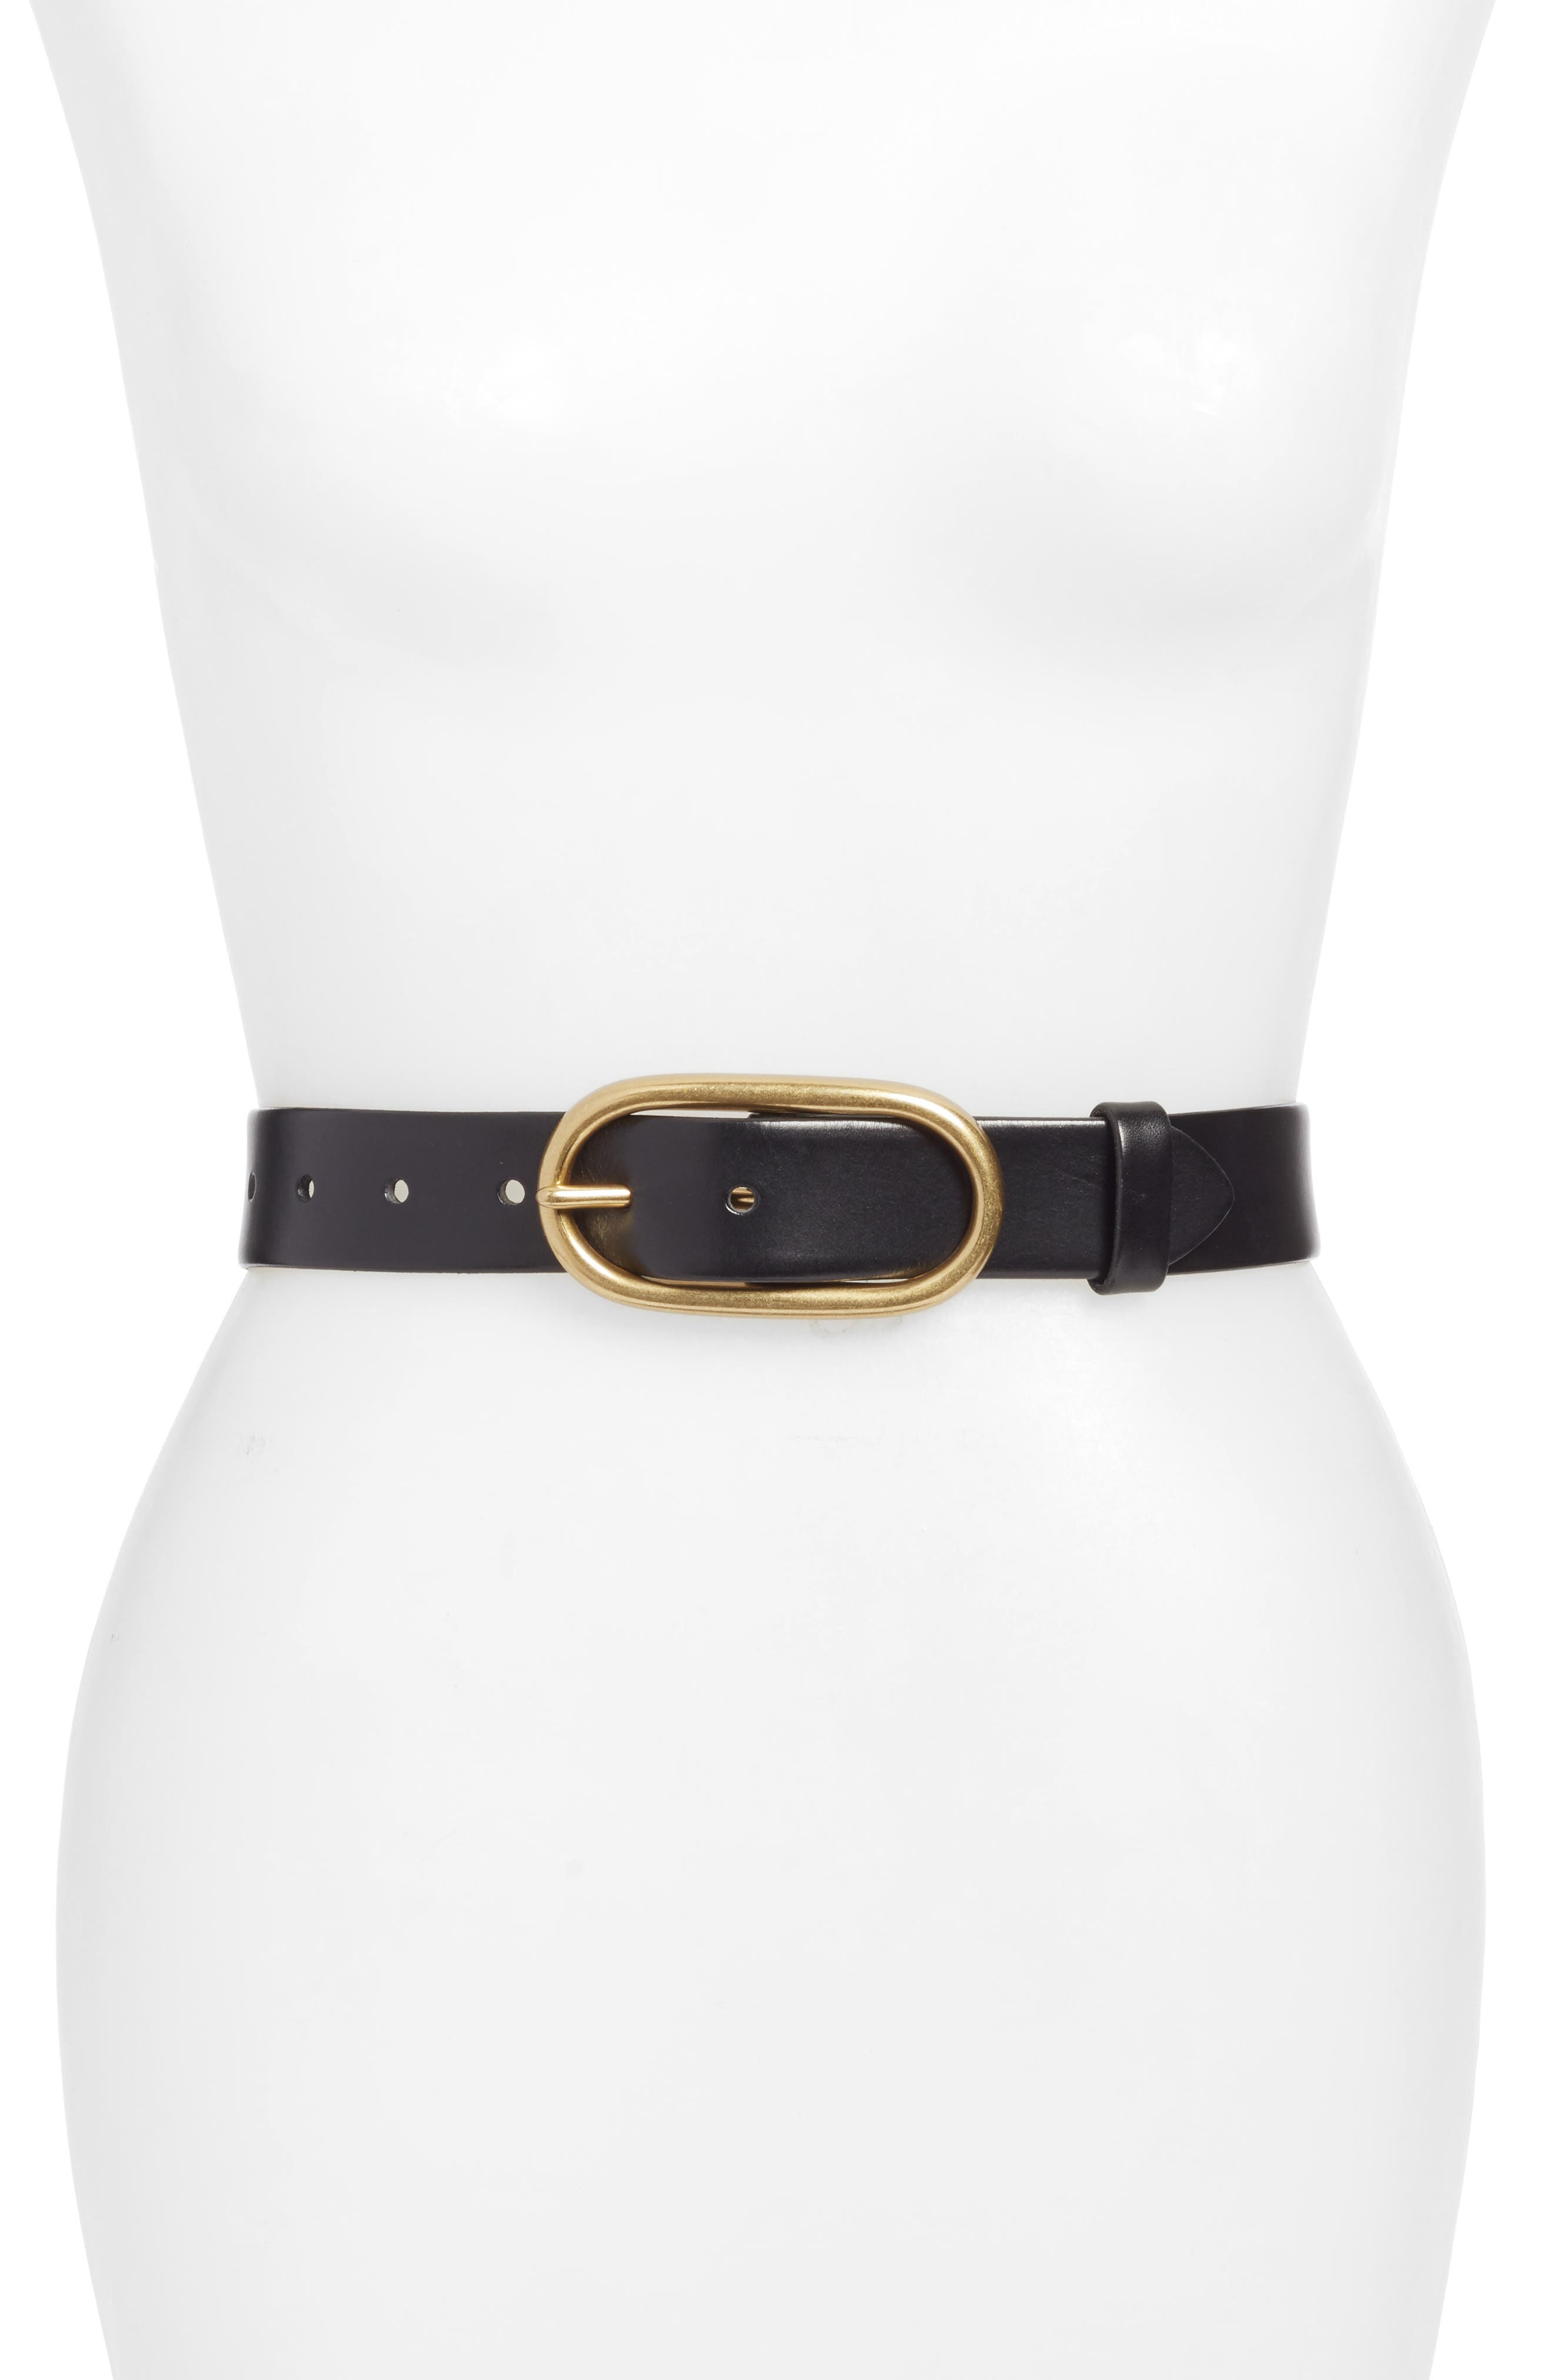 Black gold stretch belt for women with rose buckle